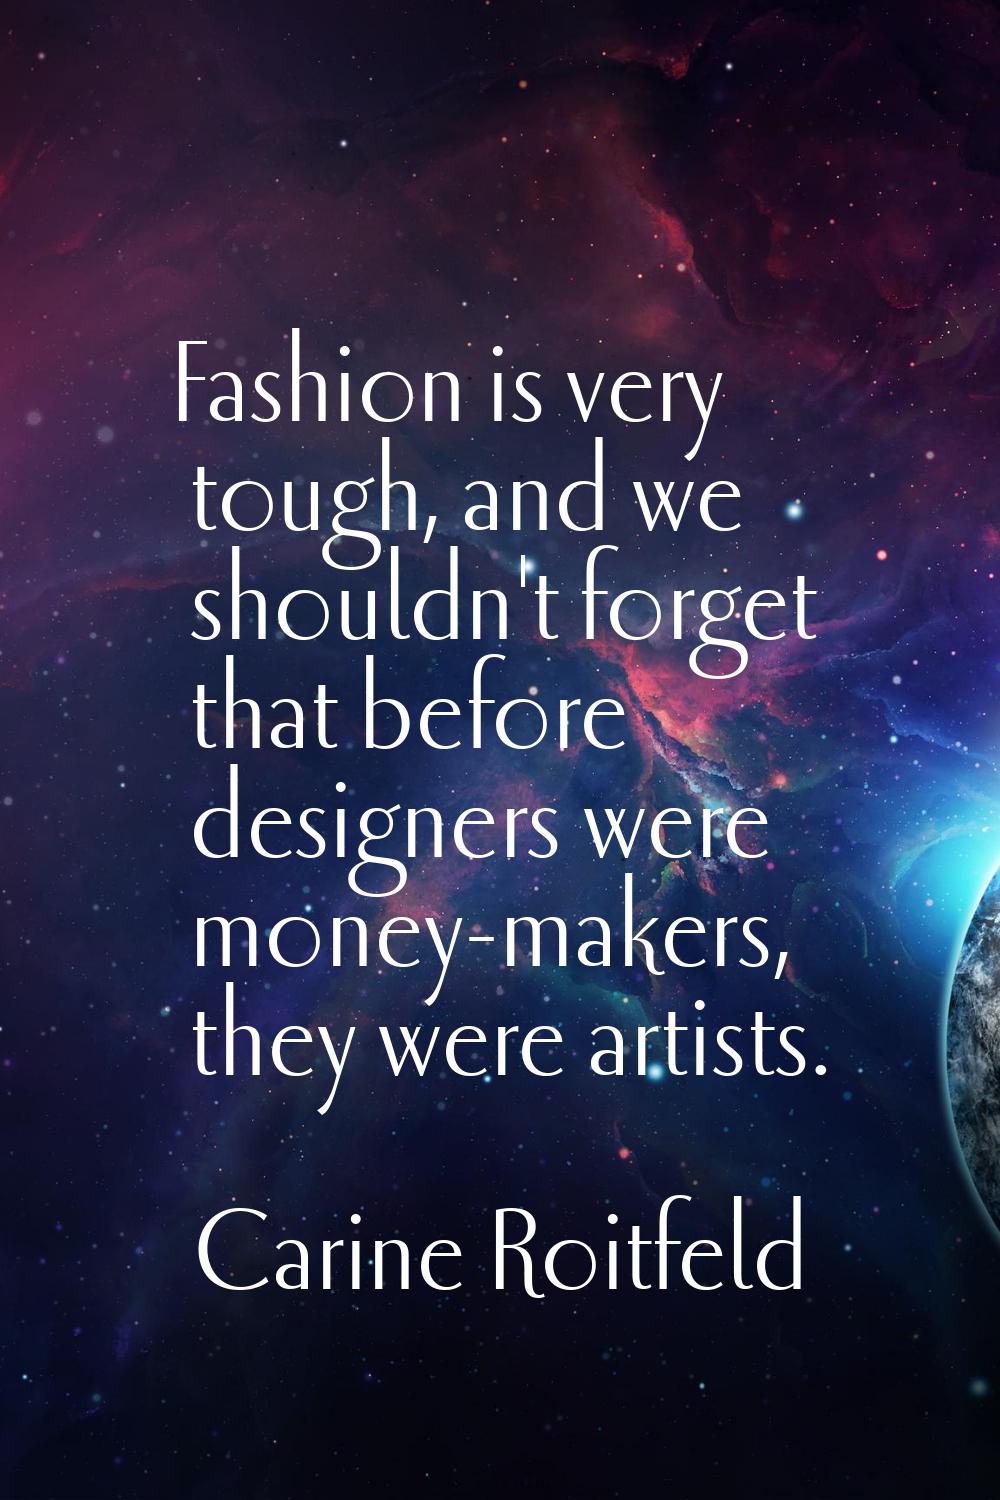 Fashion is very tough, and we shouldn't forget that before designers were money-makers, they were a